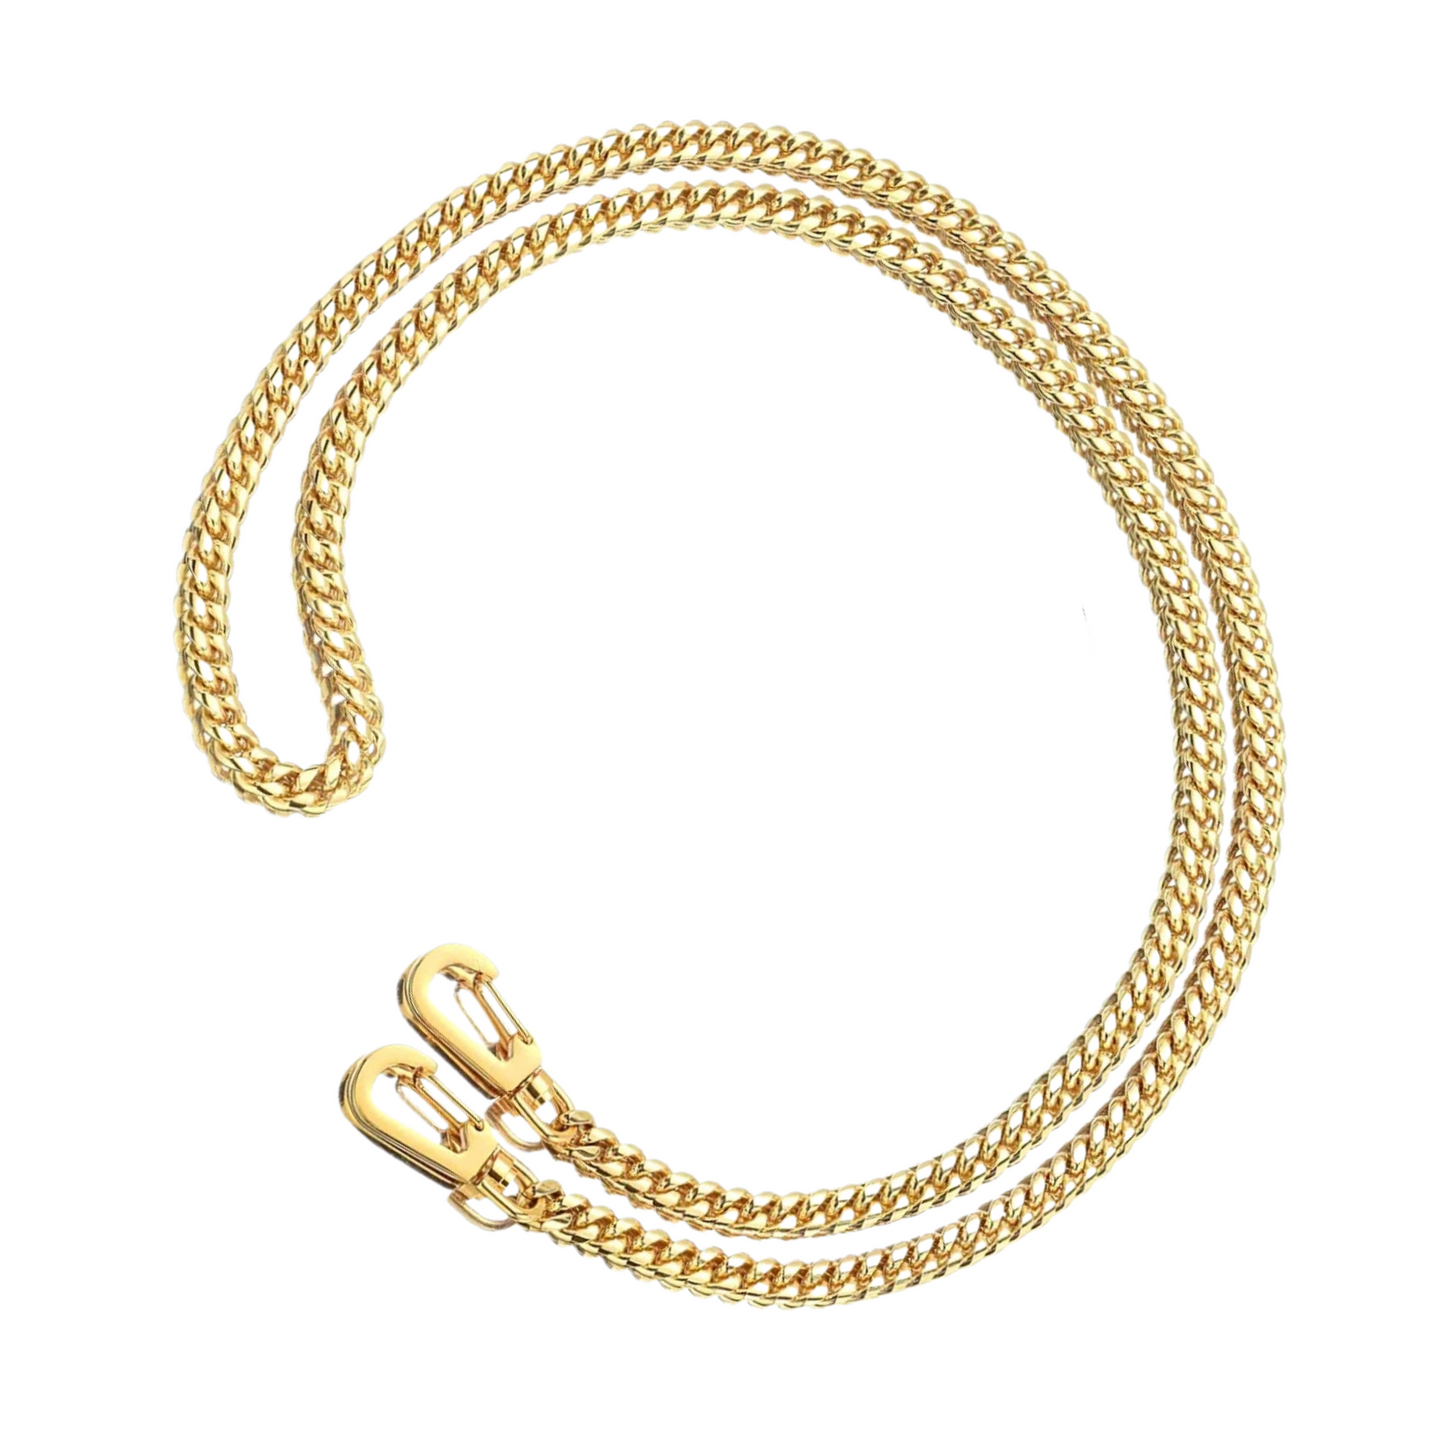 The Chain Shoulder Strap [18K Limited Edition]